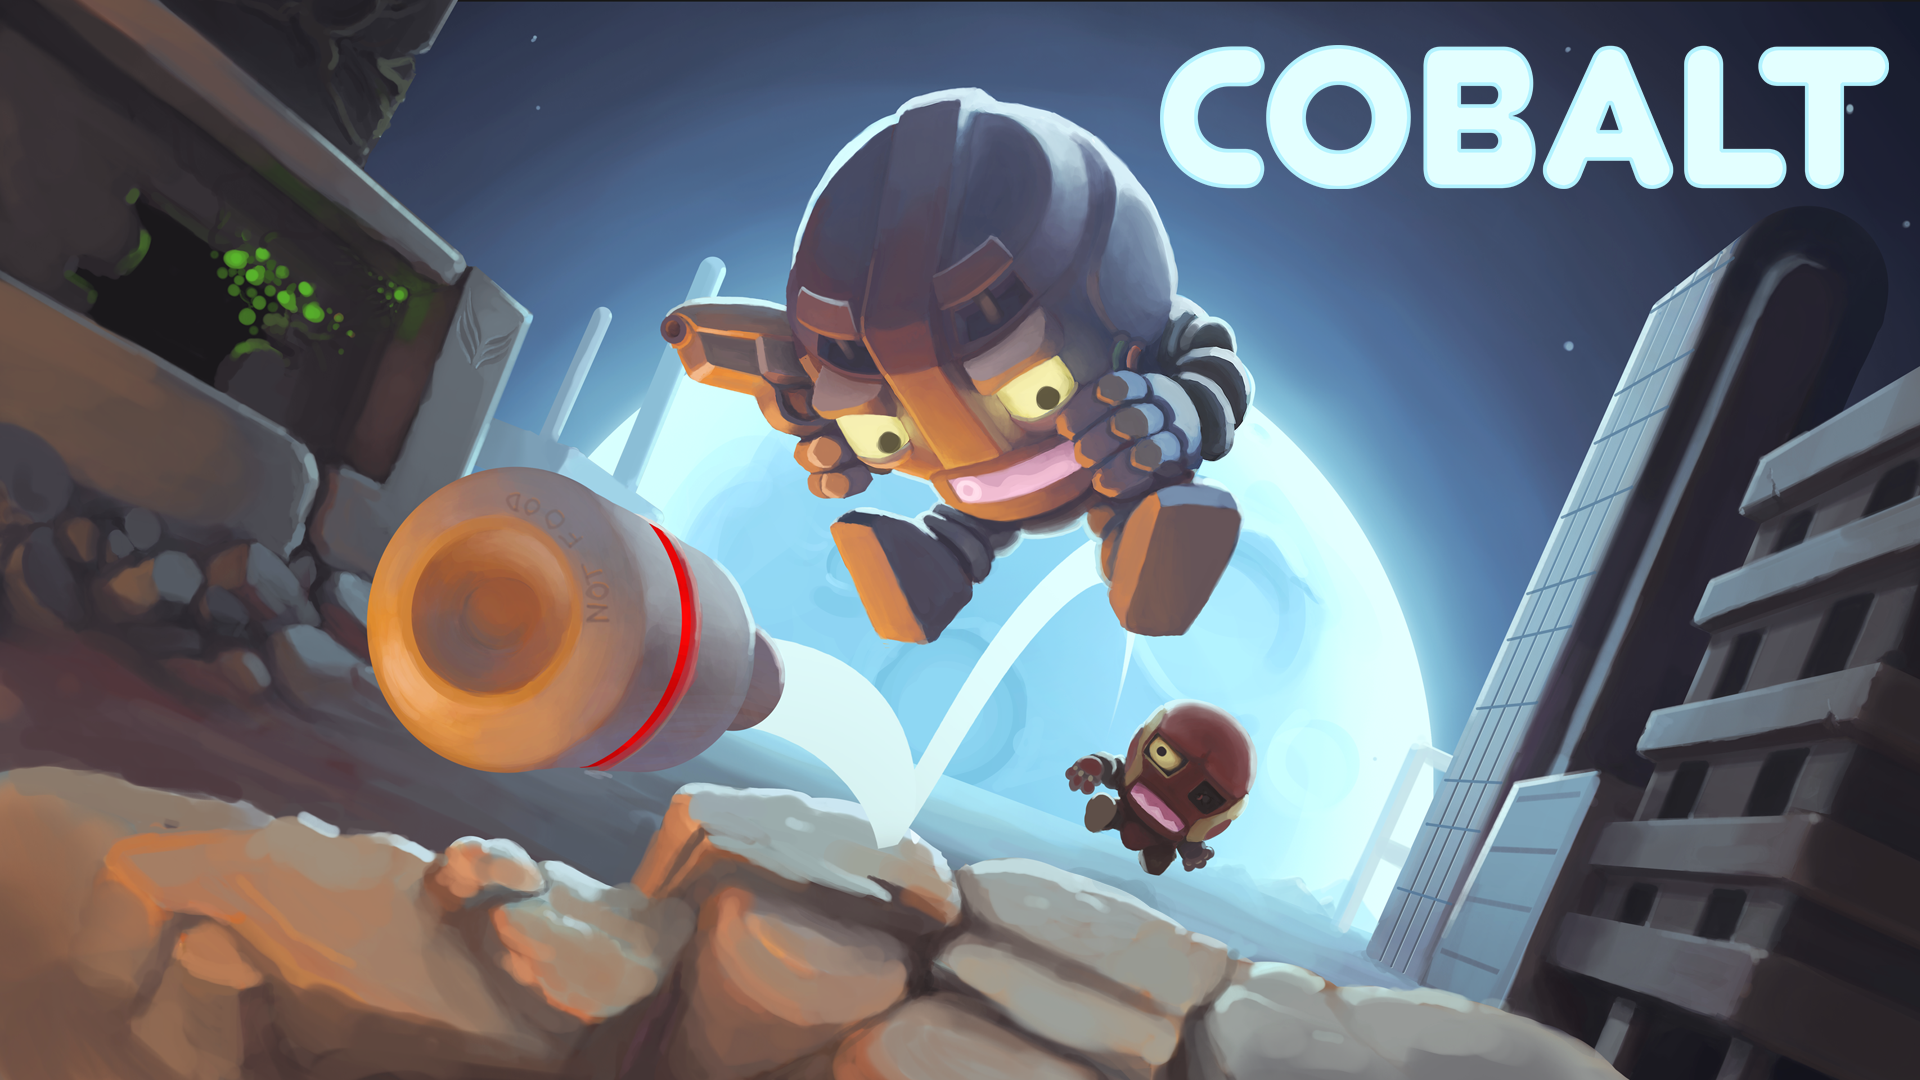 Cobalt Releasing for PC, Xbox 360, and Xbox One on February 2